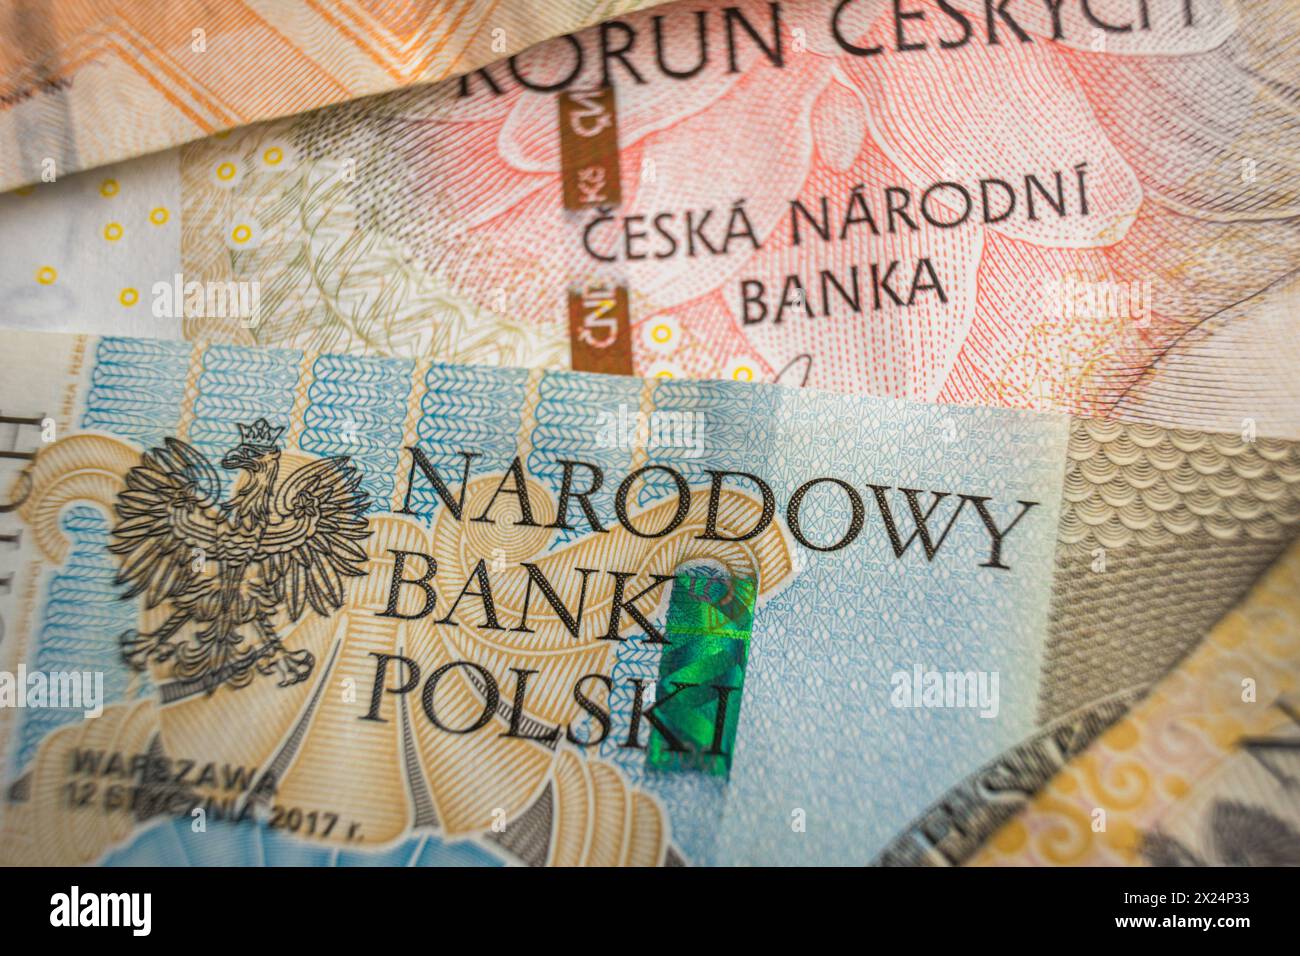 Czech and polish National Bank on banknotes close-up economic relations concept Stock Photo